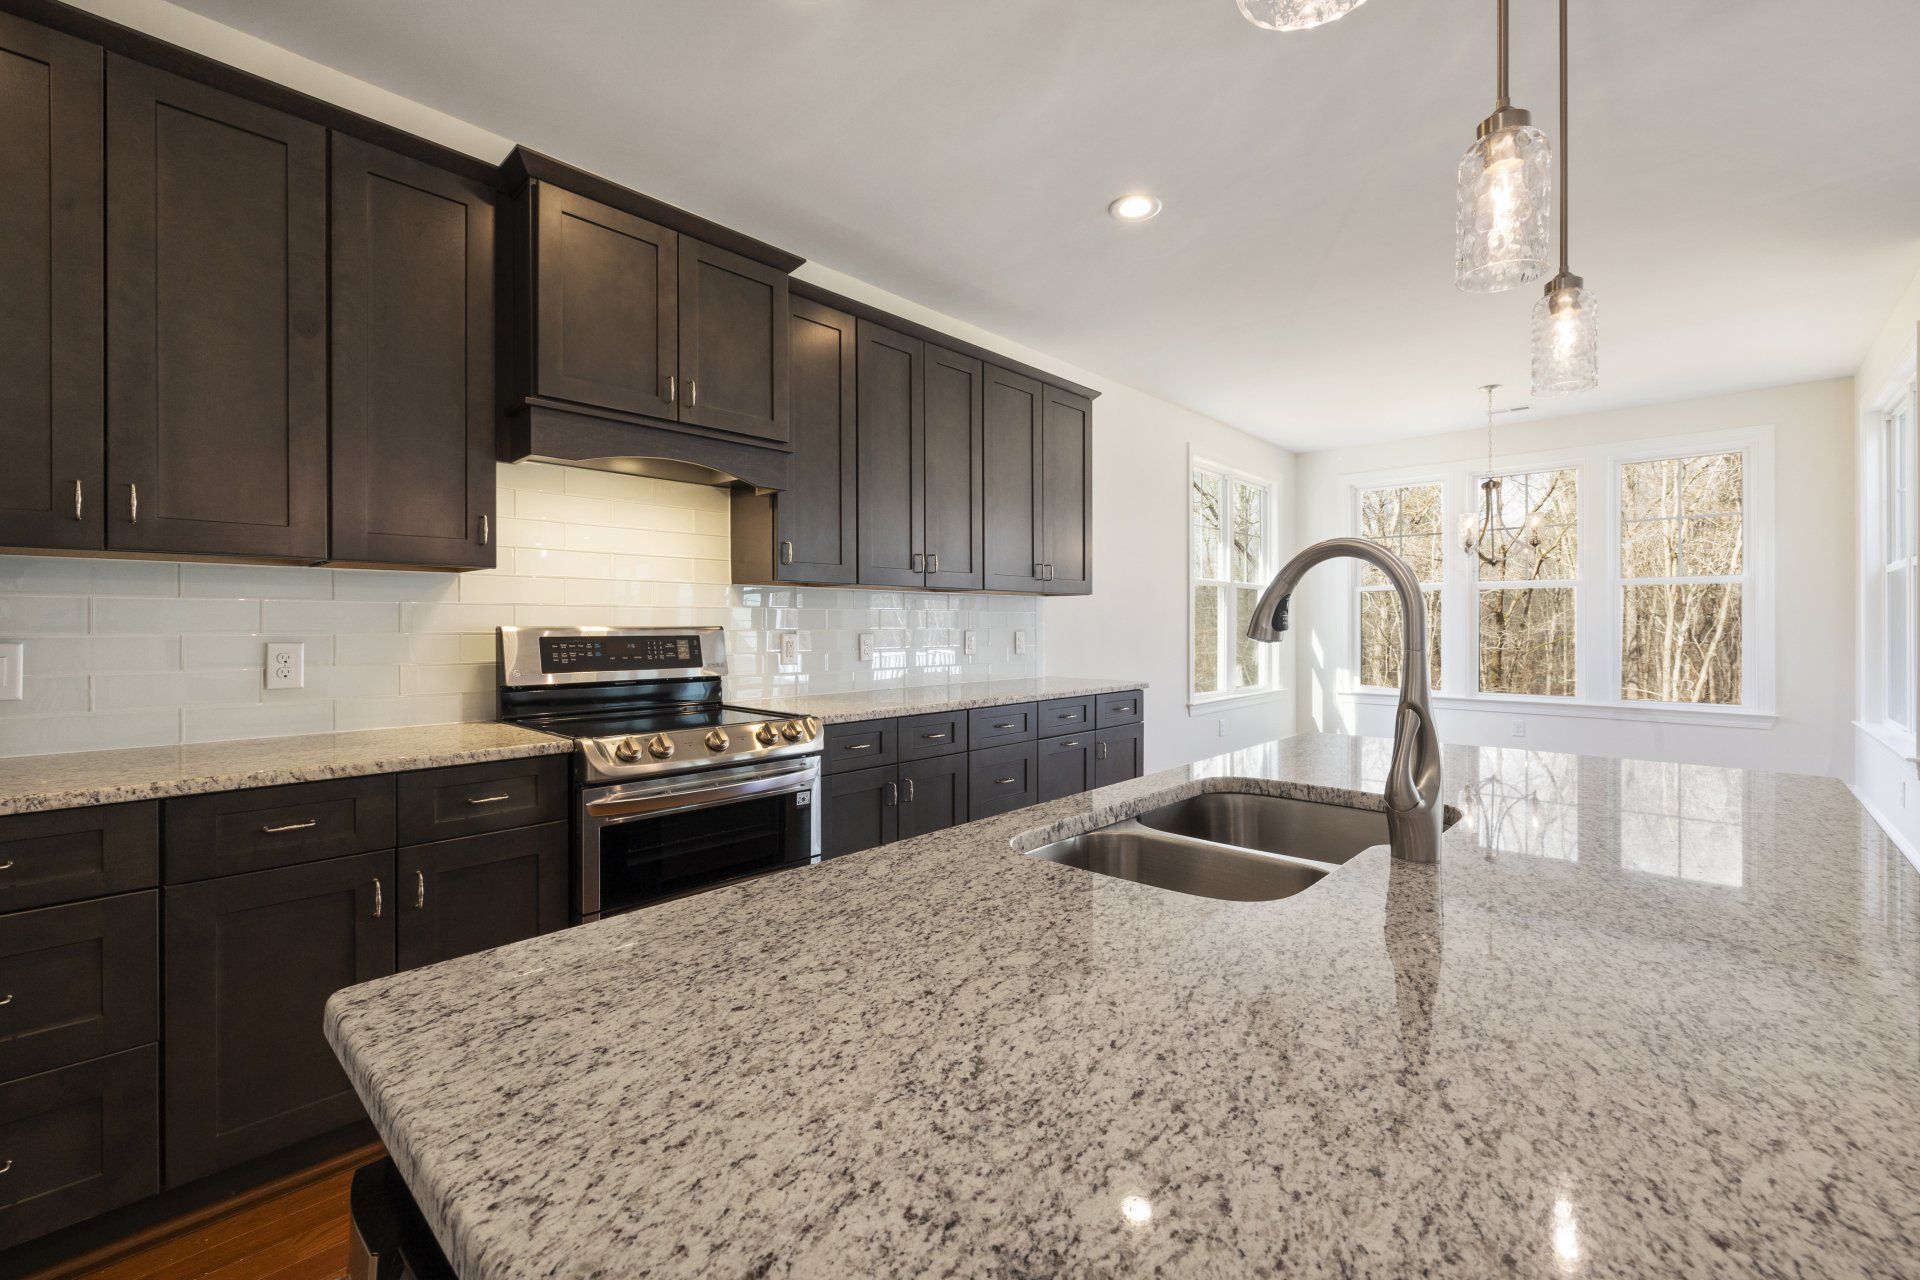 Differences Between Inset and Overlay Kitchen Cabinets